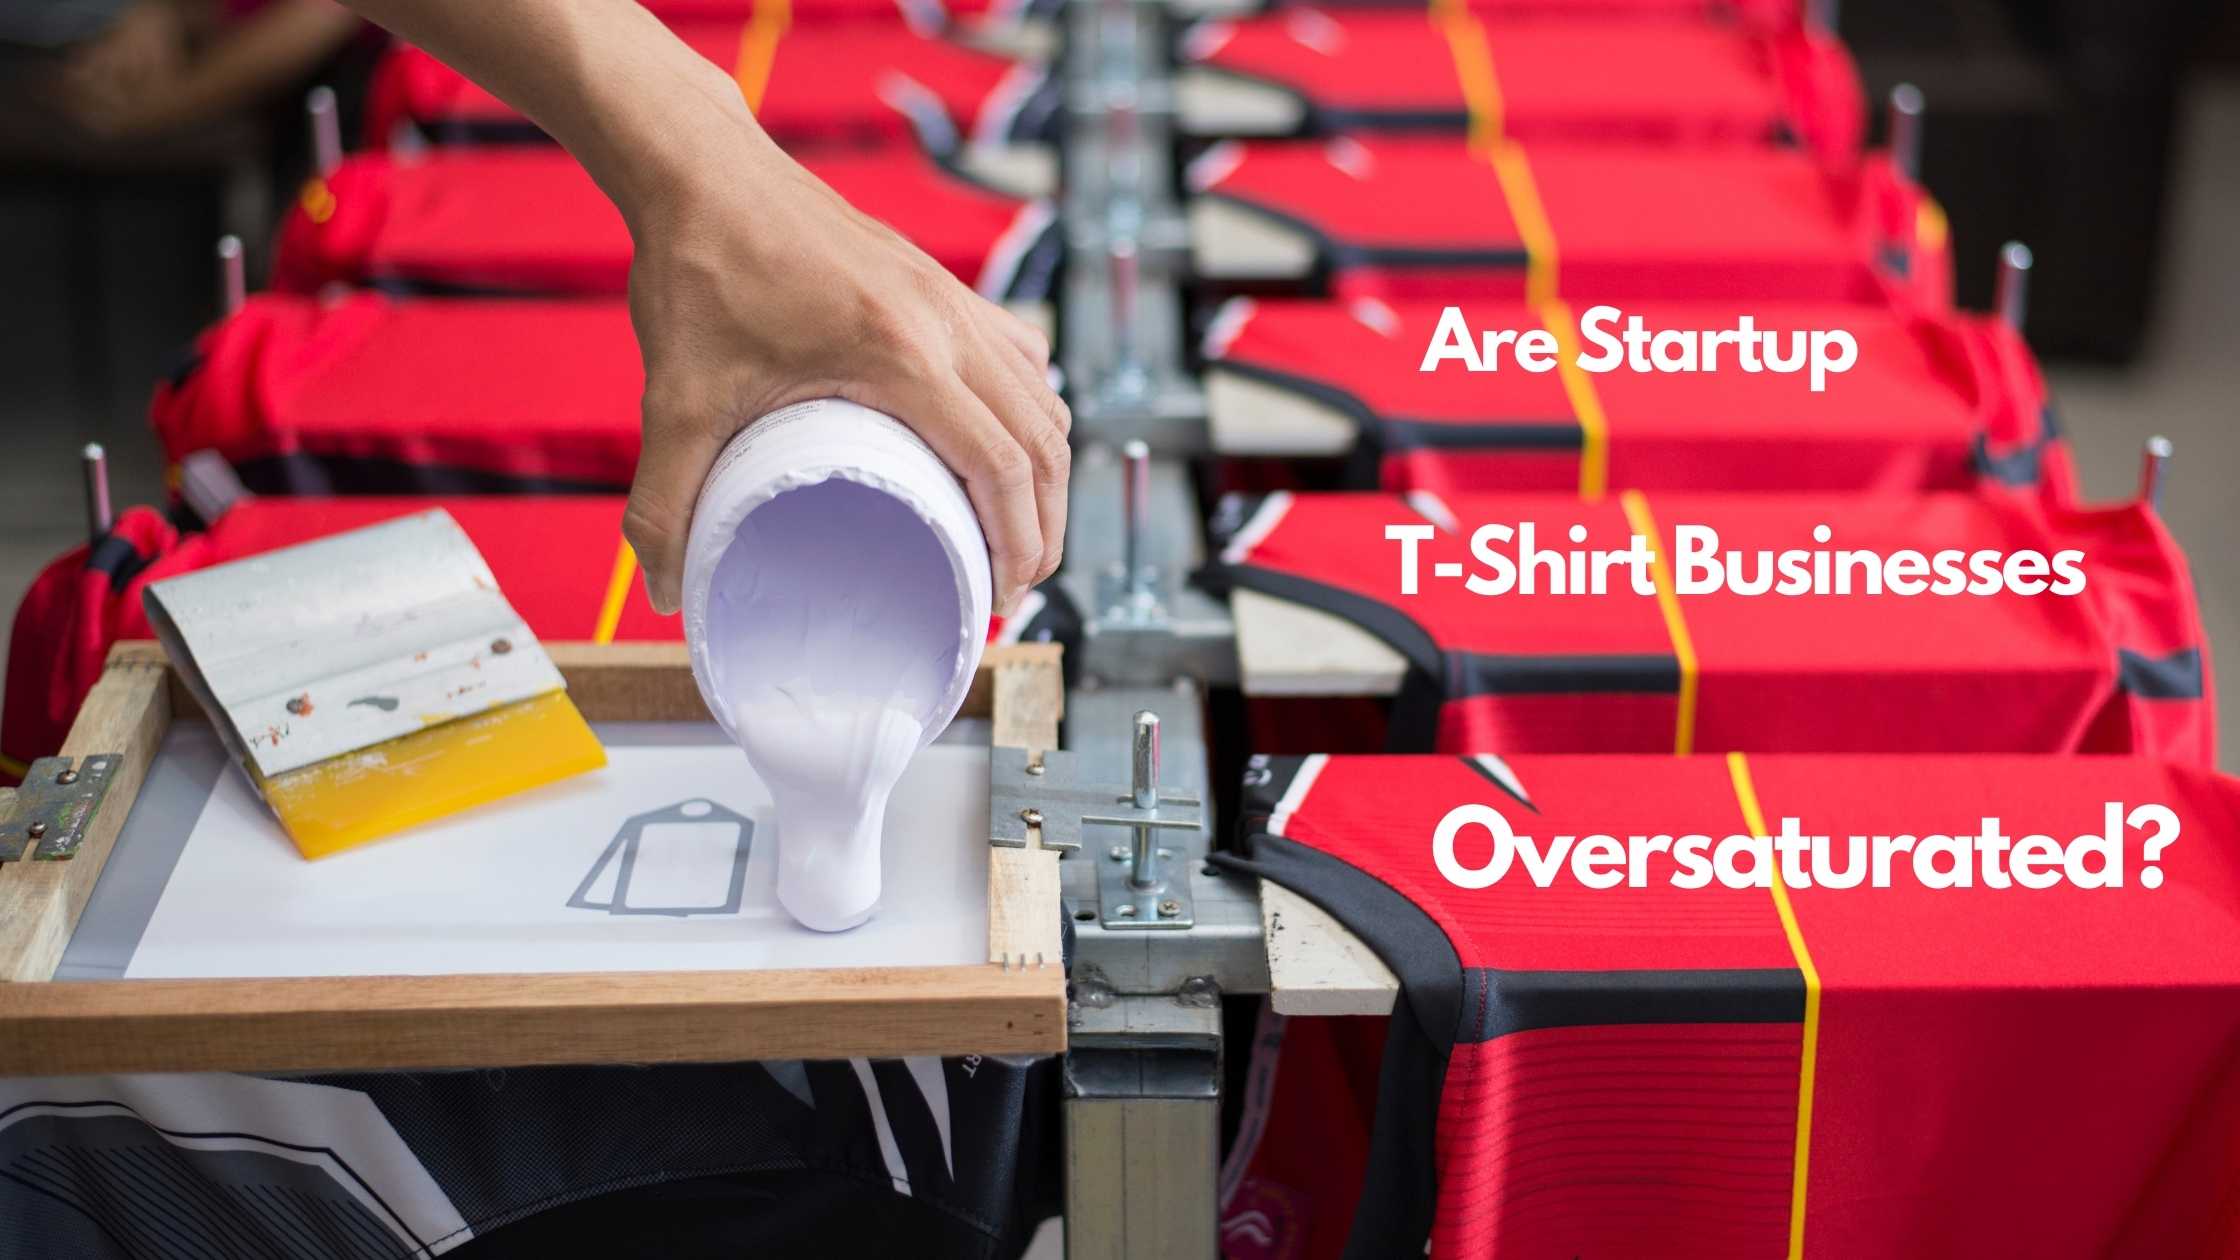 Are Startup T-Shirt Businesses Oversaturated?